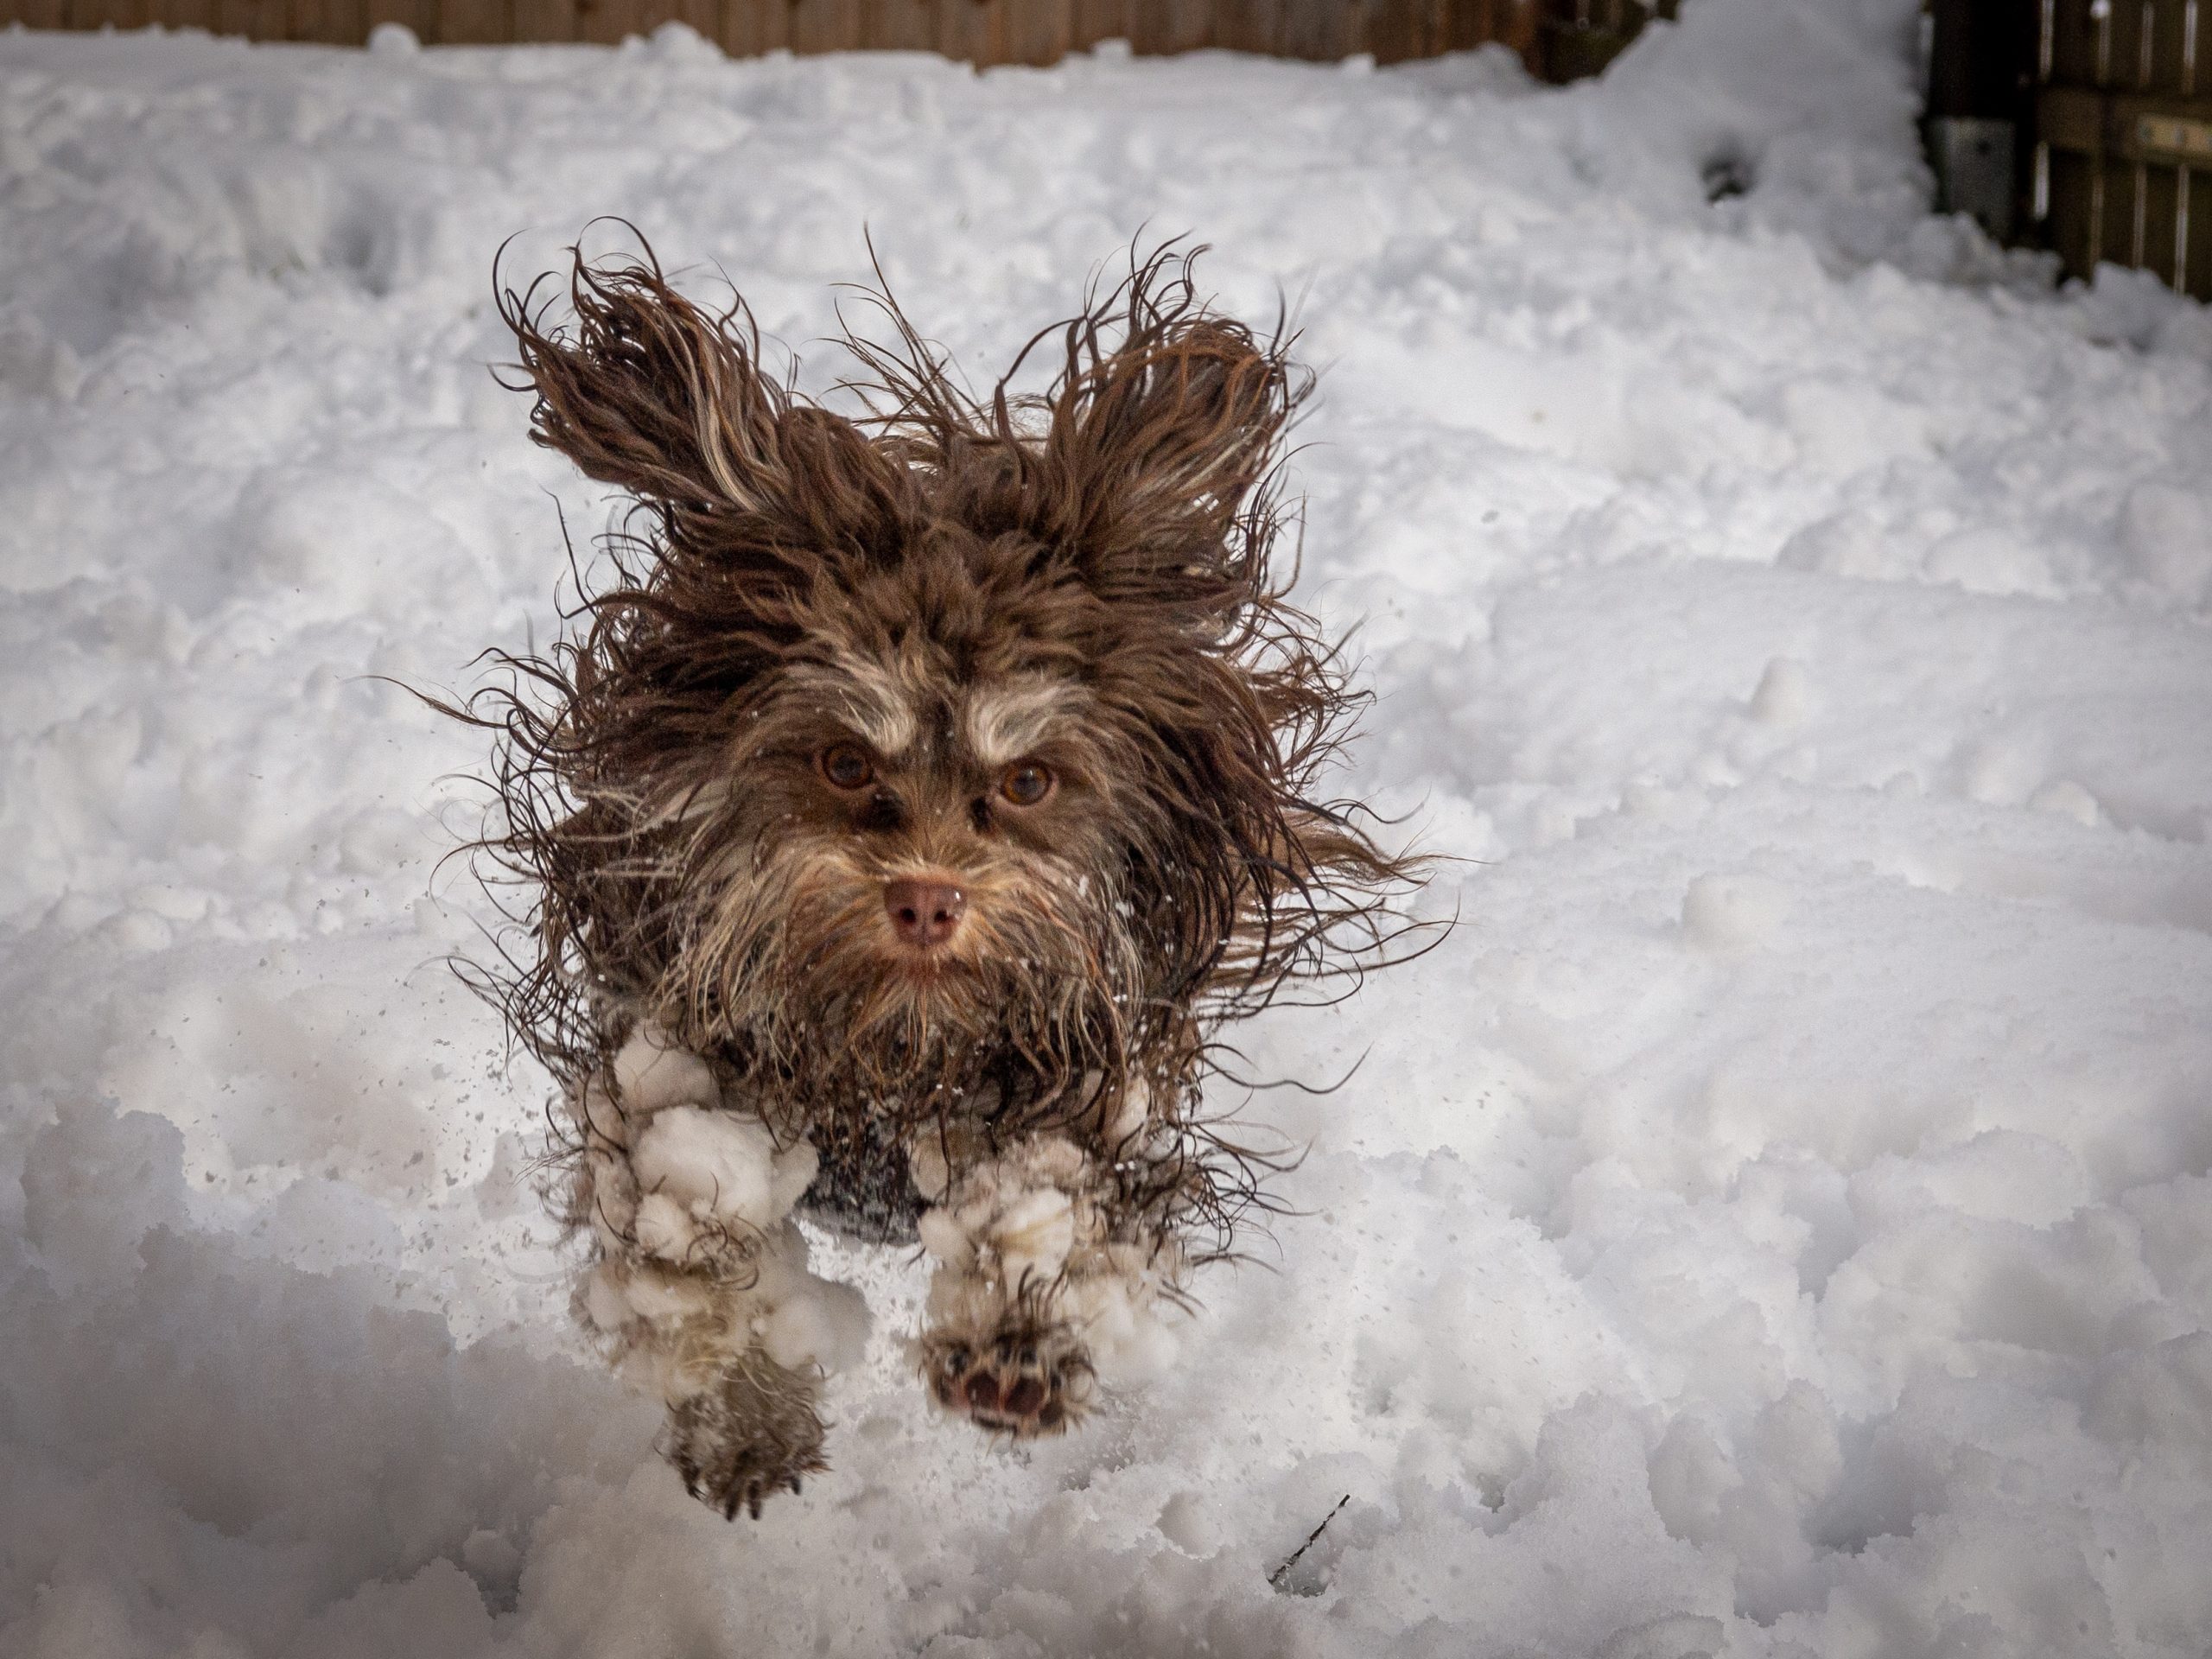 The Comedy Pet Photography Awards 2024 Tammo Zelle Stahlhofen Germany Title: It's fu.... cold! Description: Our dog had a lot of fun in the snow, but unfortunately ice crystals always stick to his paws. Animal: Our Bolonka Zwetna lady 